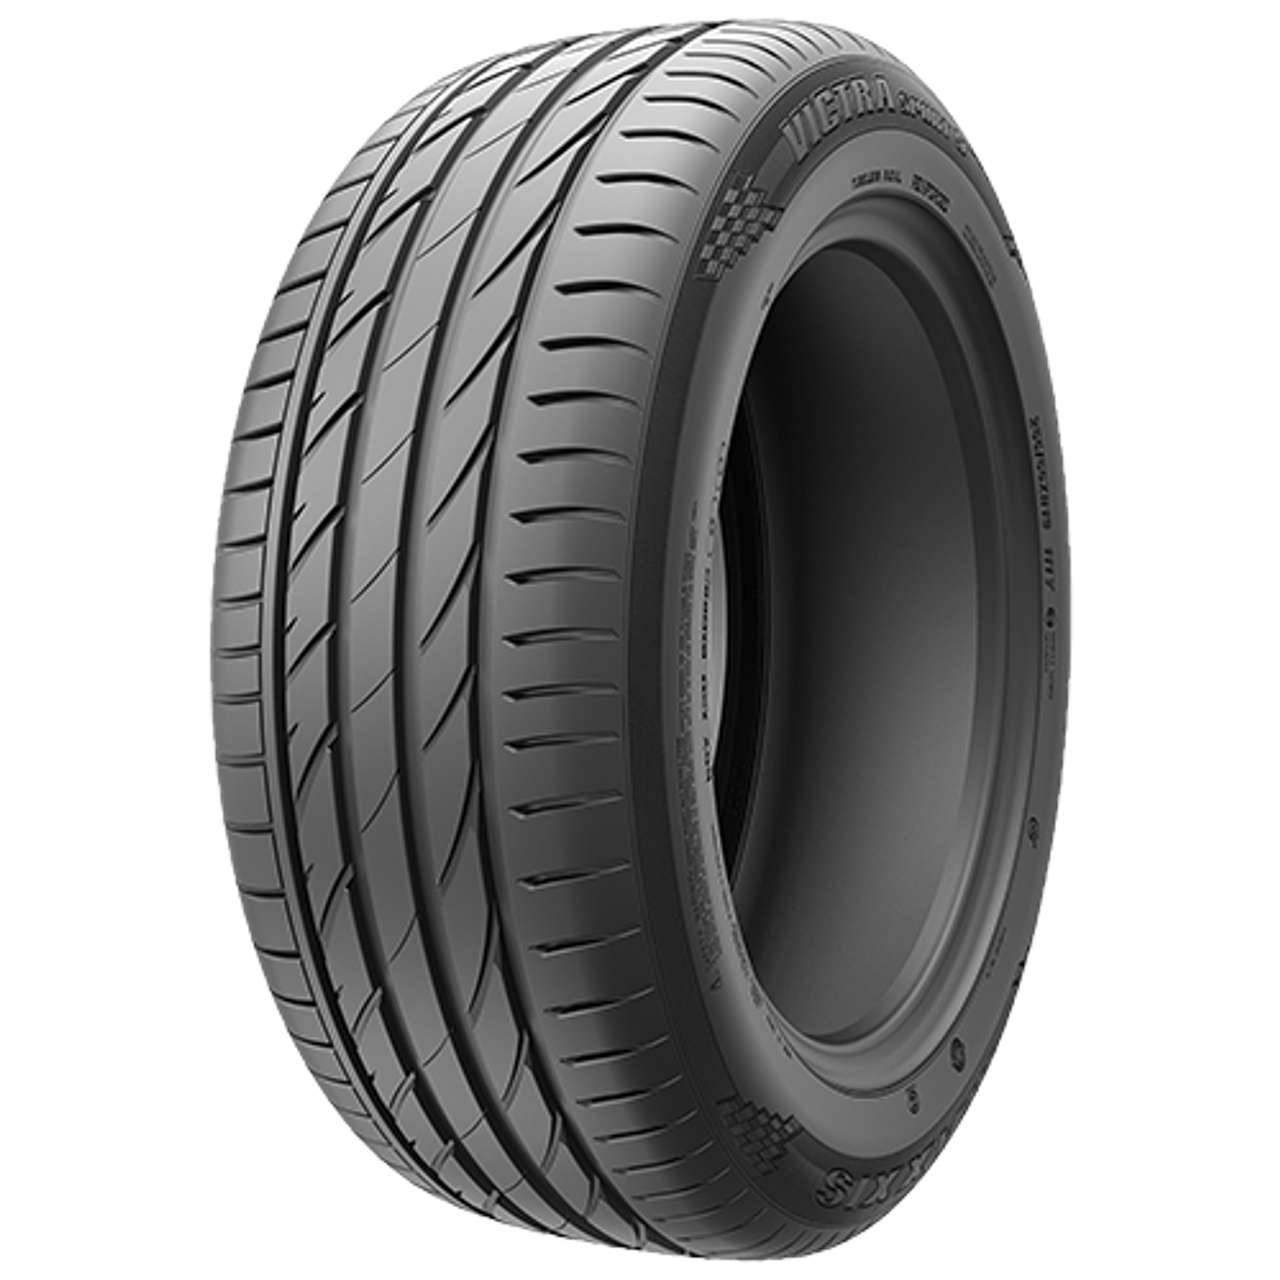 MAXXIS VICTRA SPORT 5 (VS5) 225/45ZR17 94Y MFS BSW